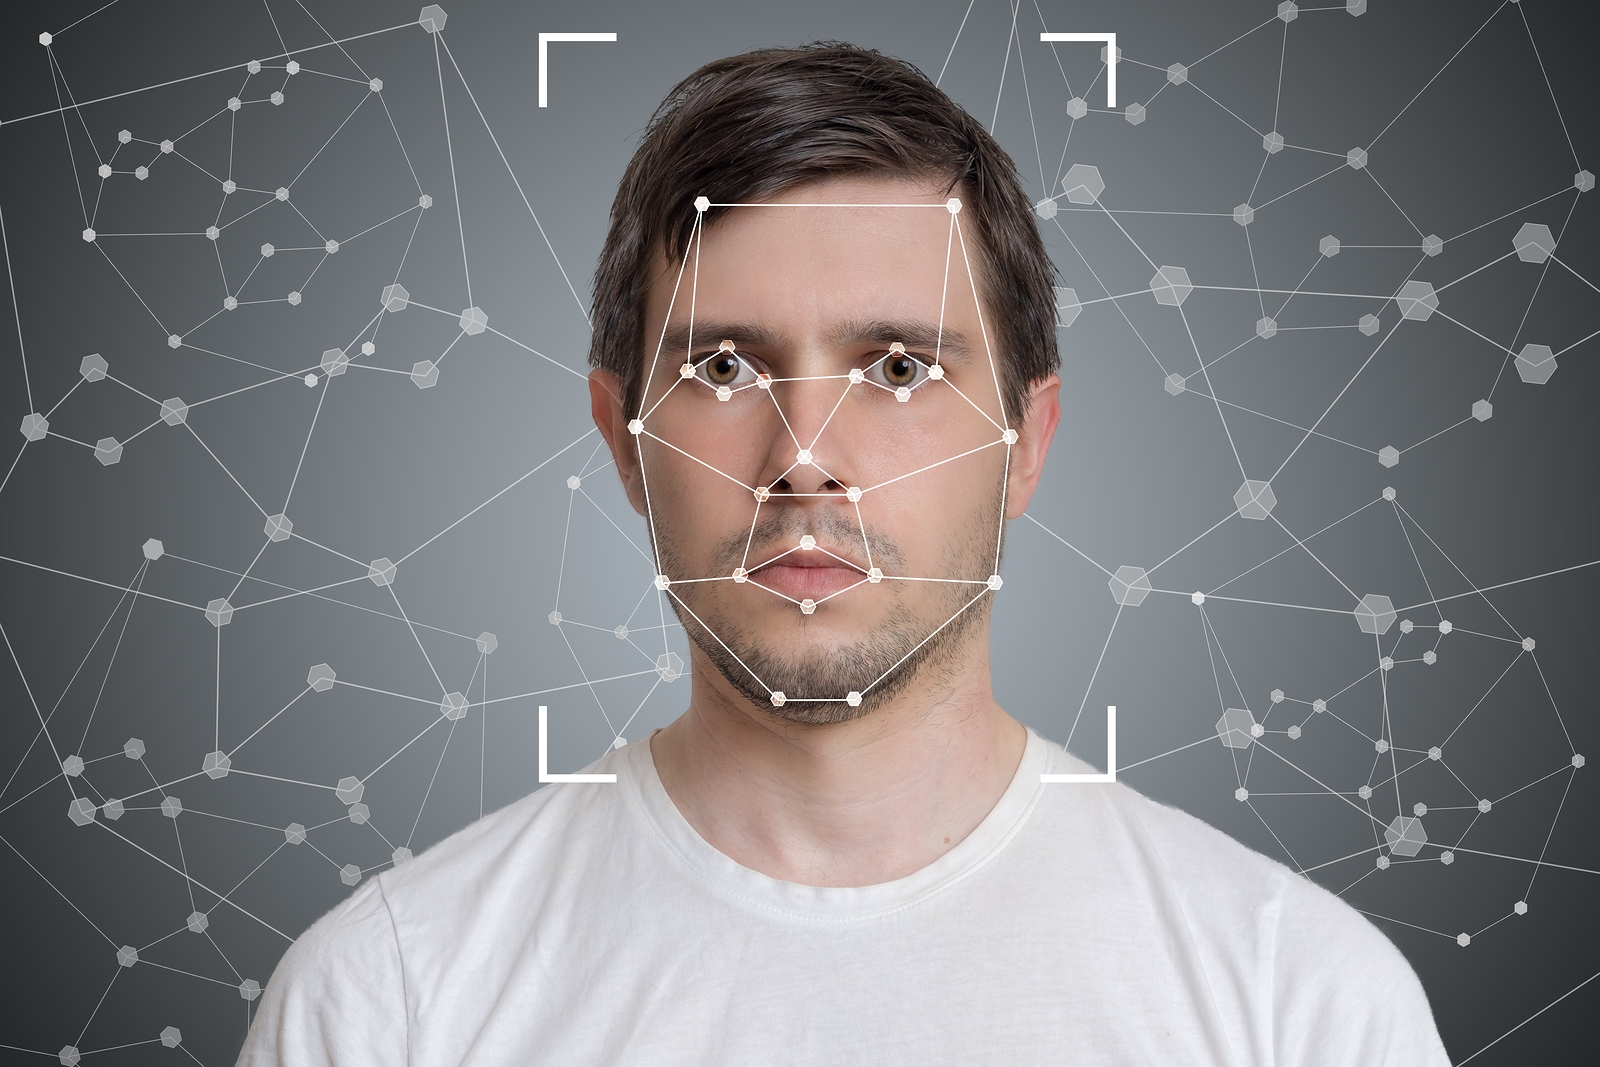 Face detection and recognition of man. Computer vision and artificial intelligence concept.